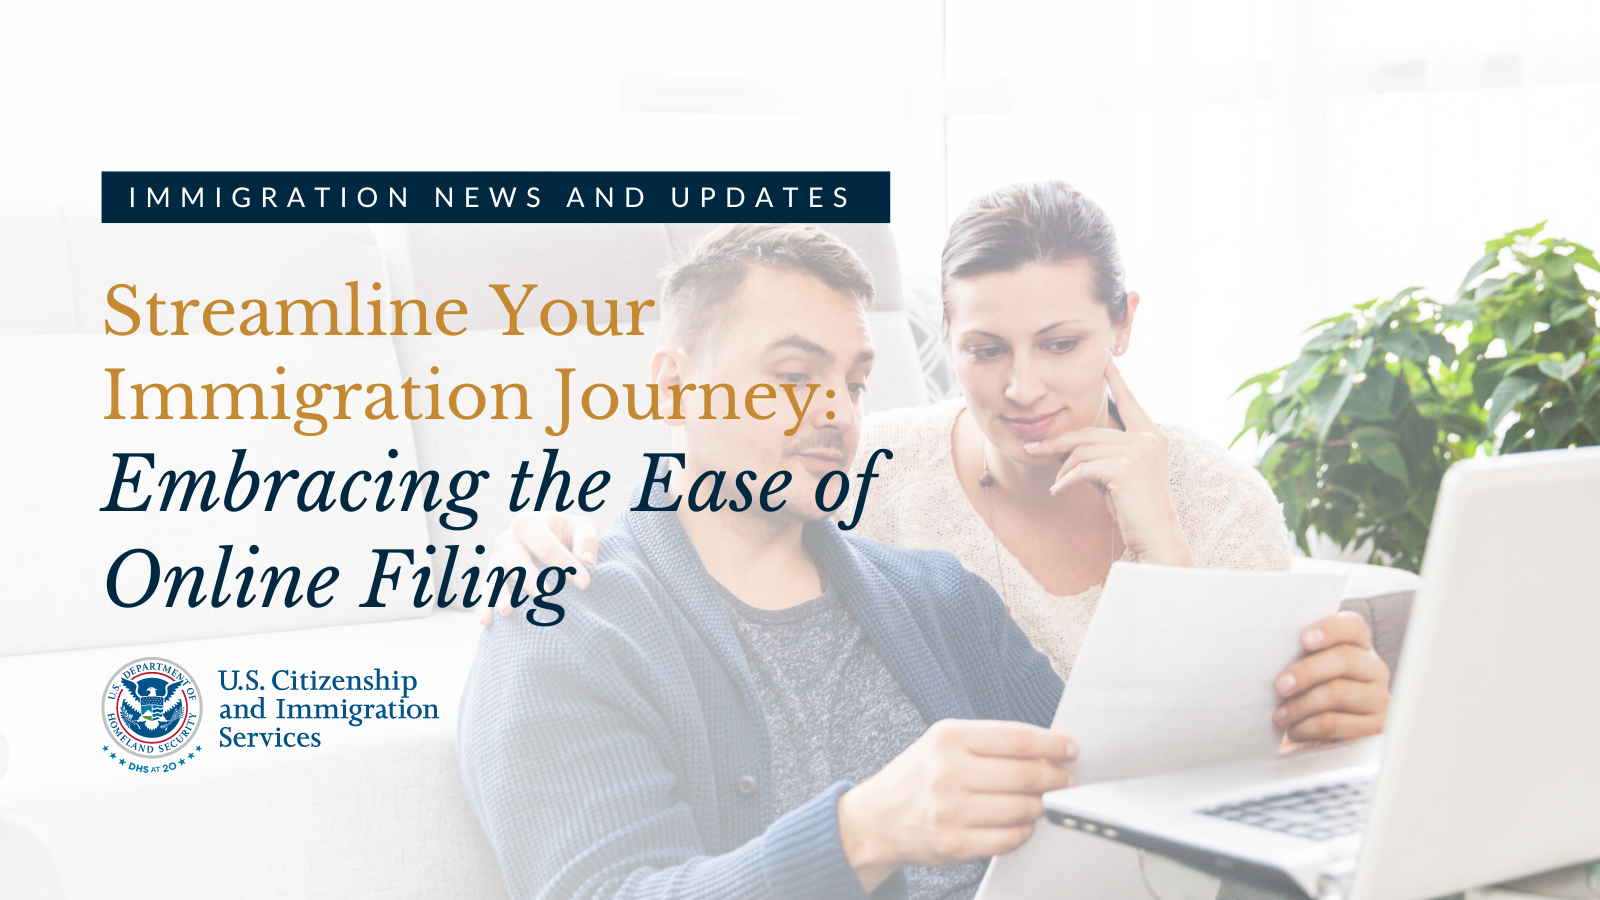 Streamline Your Immigration Journey: Embracing the Ease of Online Filing